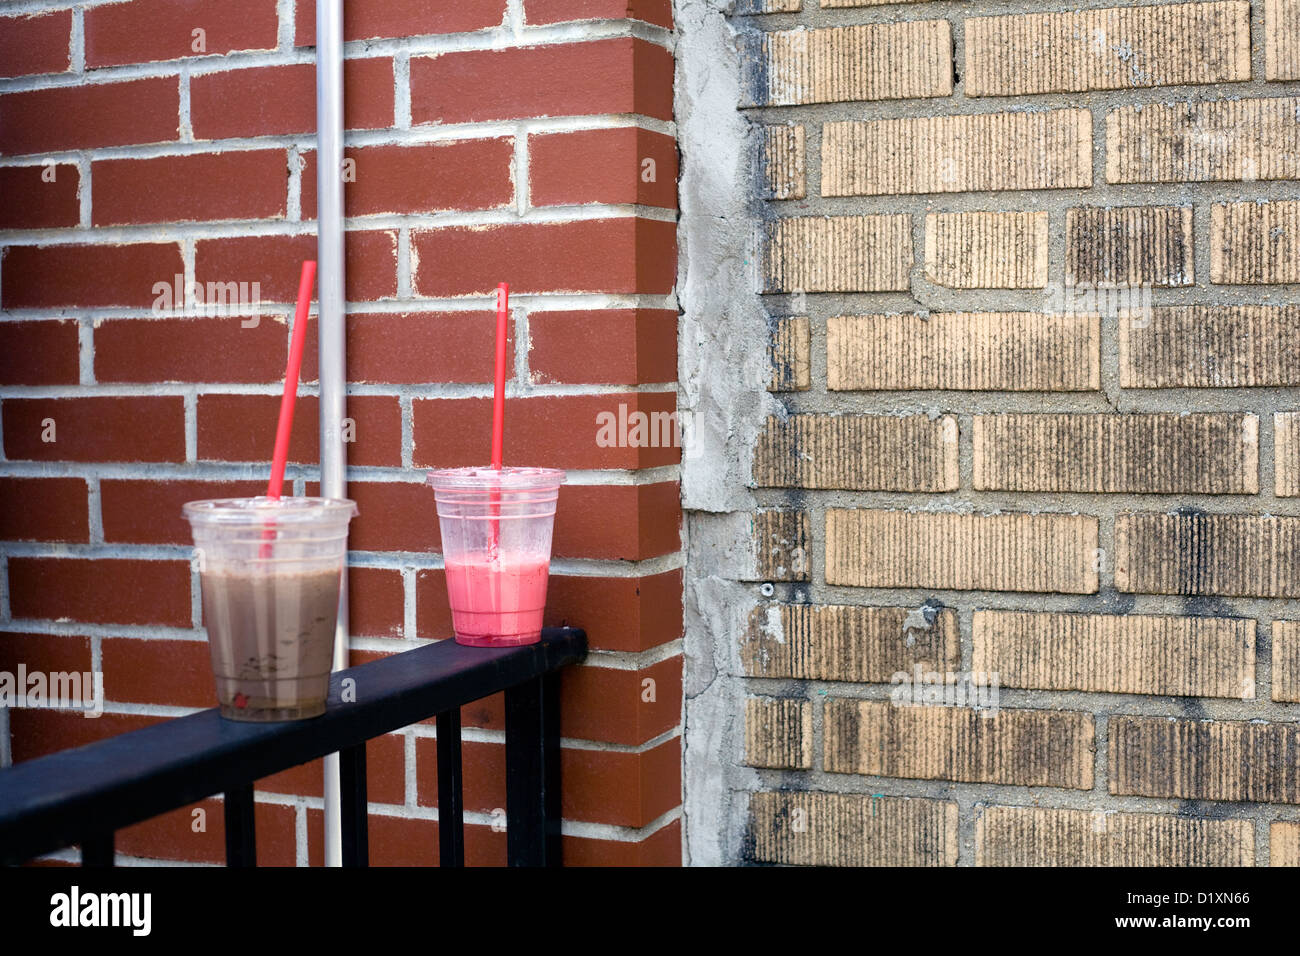 Cold drink takeout plastic cups balanced on fence Stock Photo